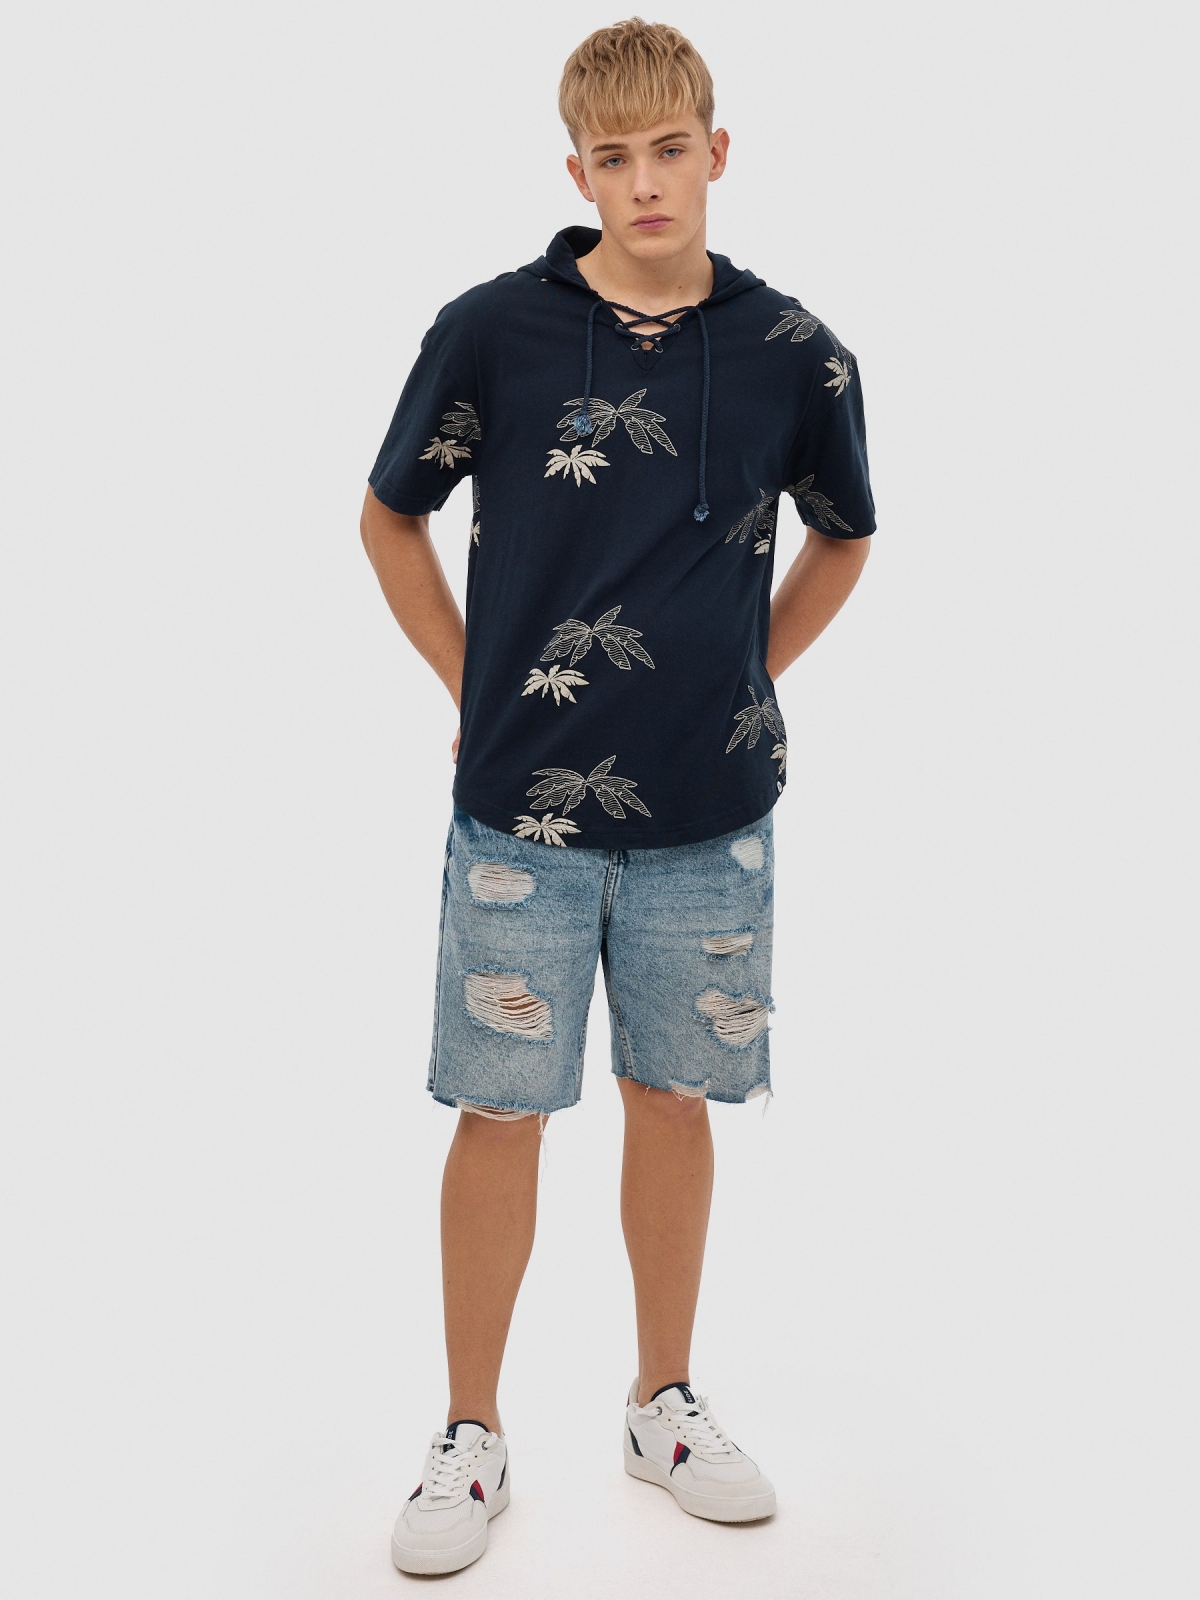 Palm trees hooded t-shirt navy front view